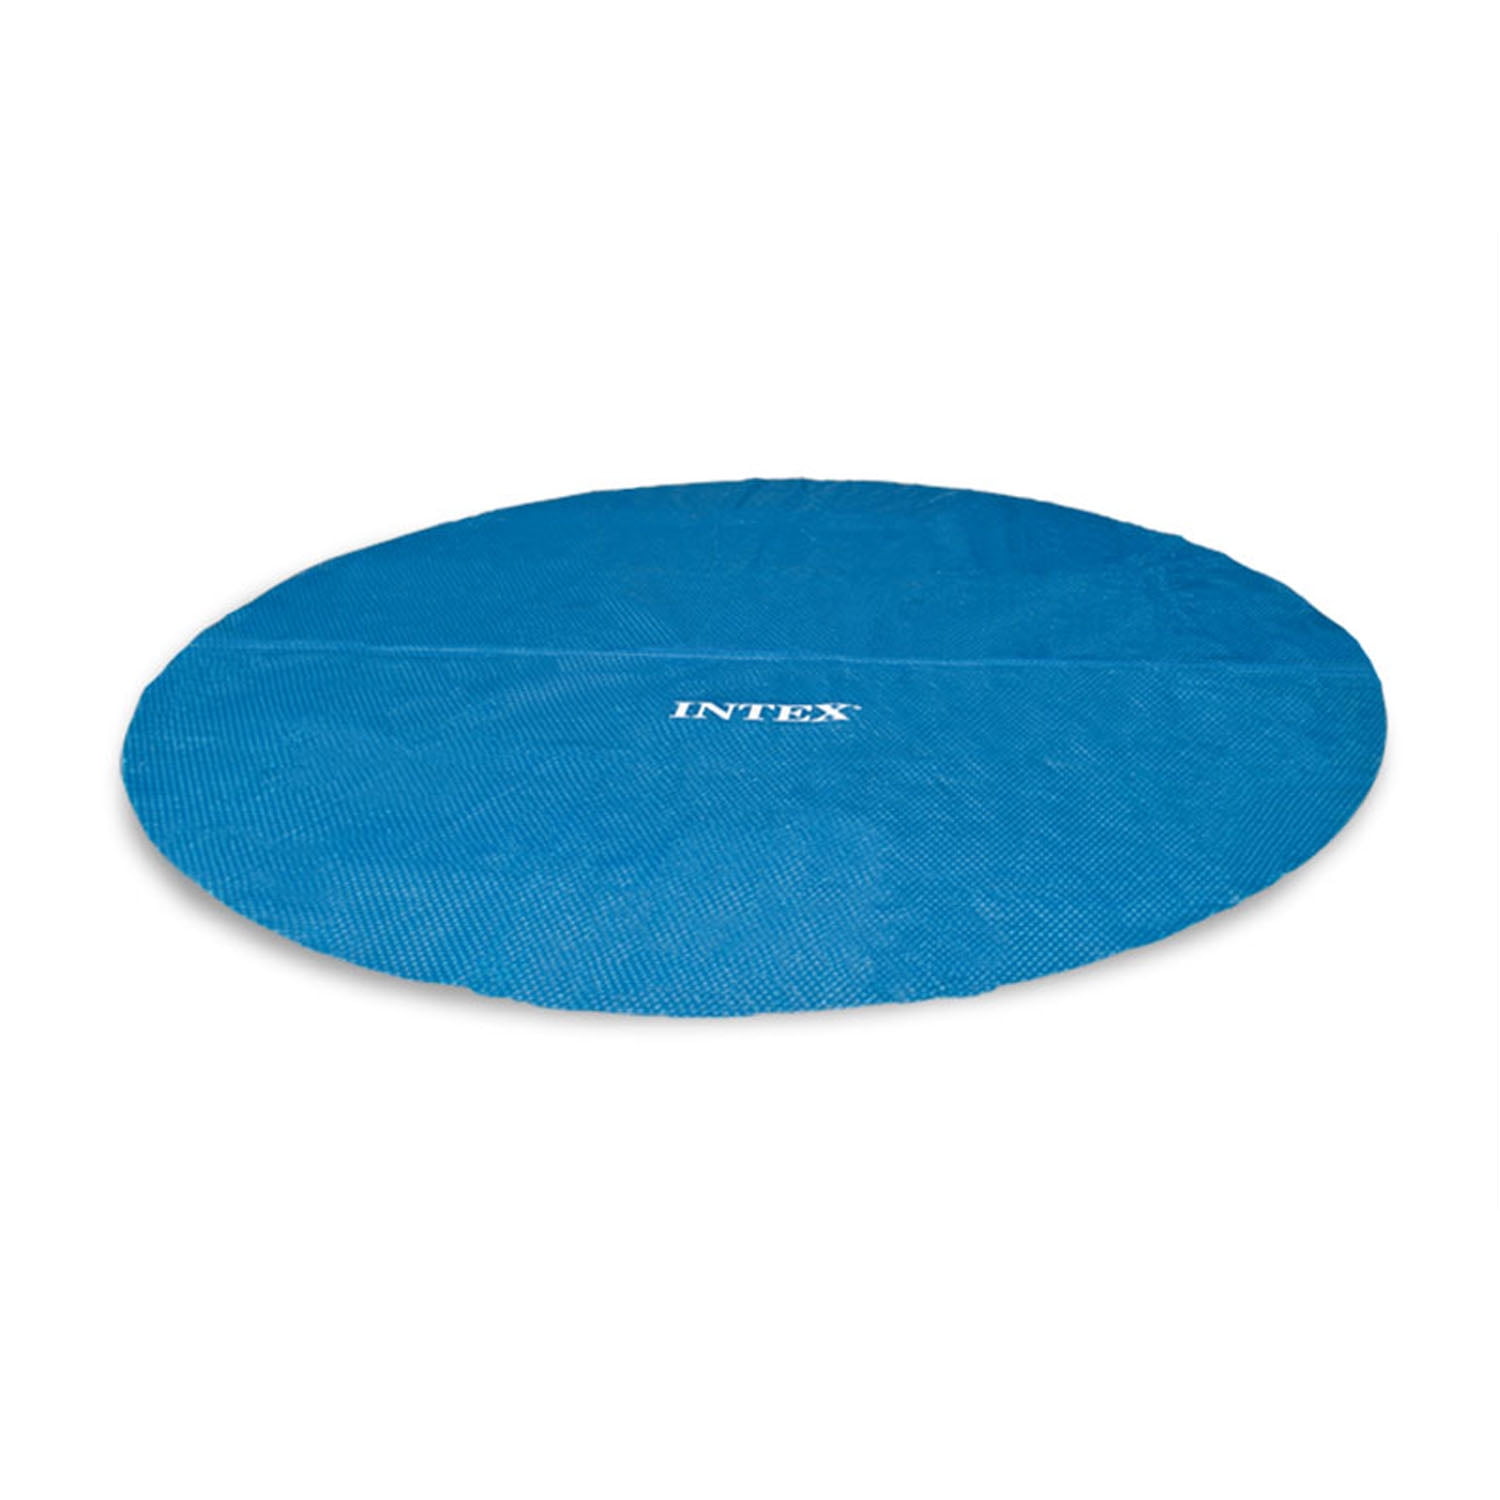 Open Box Intex 12' Round Frame Set Easy Swimming Pool Debris Cover 2 Pack